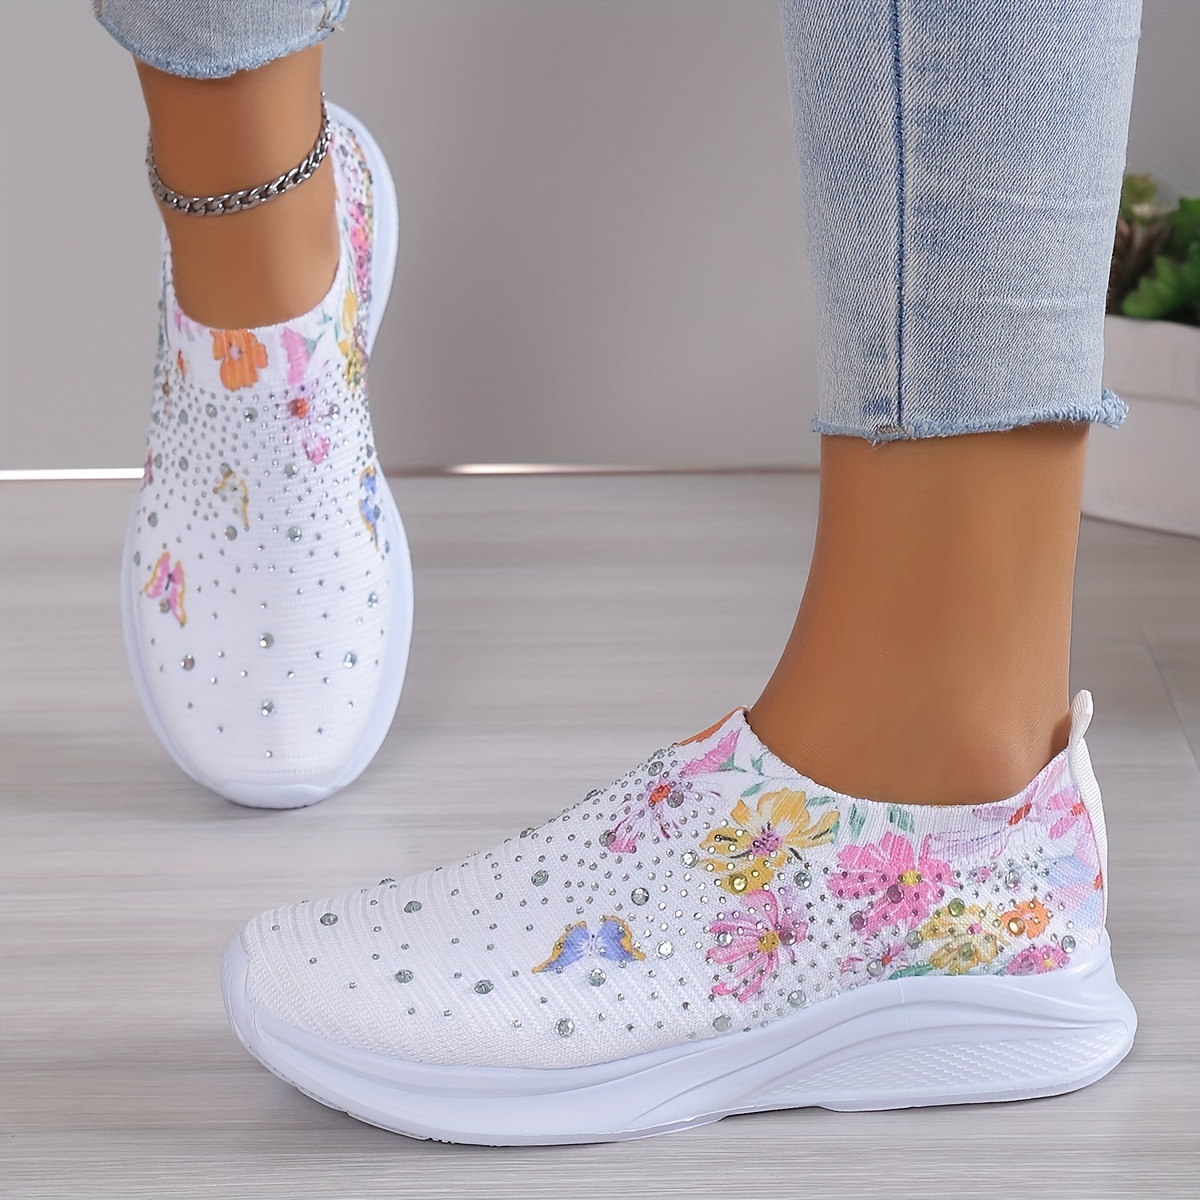 Solid Color Mesh Running Shoes, Women's Rhinestone Decor Flower Pattern Soft Thick Breathable Flying Woven Lightweight Comfortable Slip on Athletic